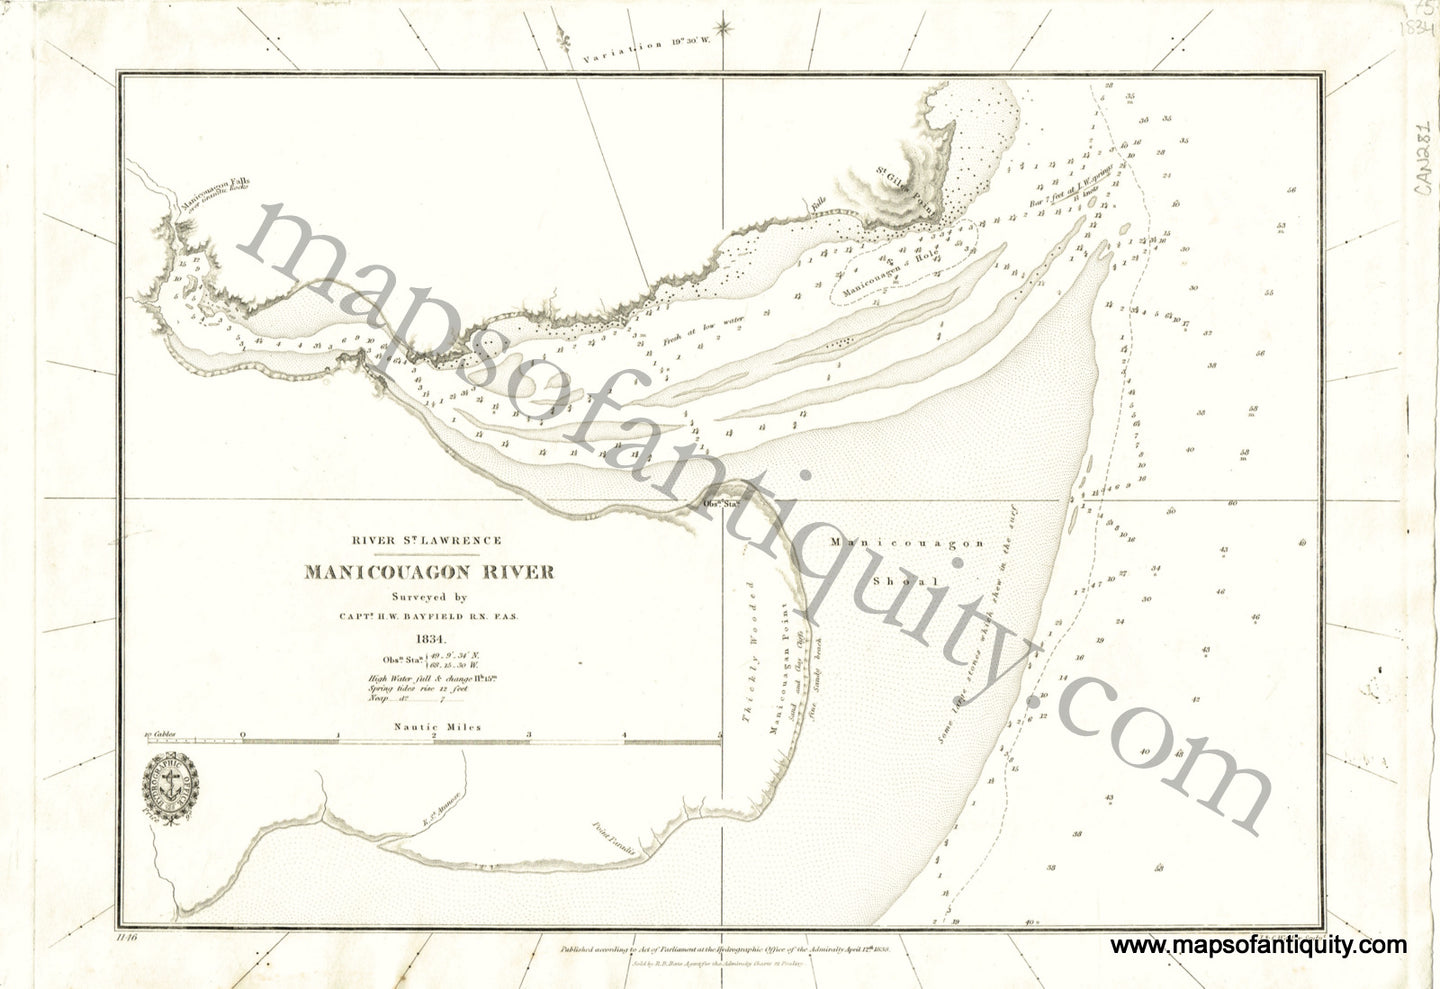 Antique-Black-and-White-Nautical-Chart-River-St.-Lawrence:-Manicouagon-River-North-America-Nautical-Charts-Canada-1838-British-Admiralty-Maps-Of-Antiquity